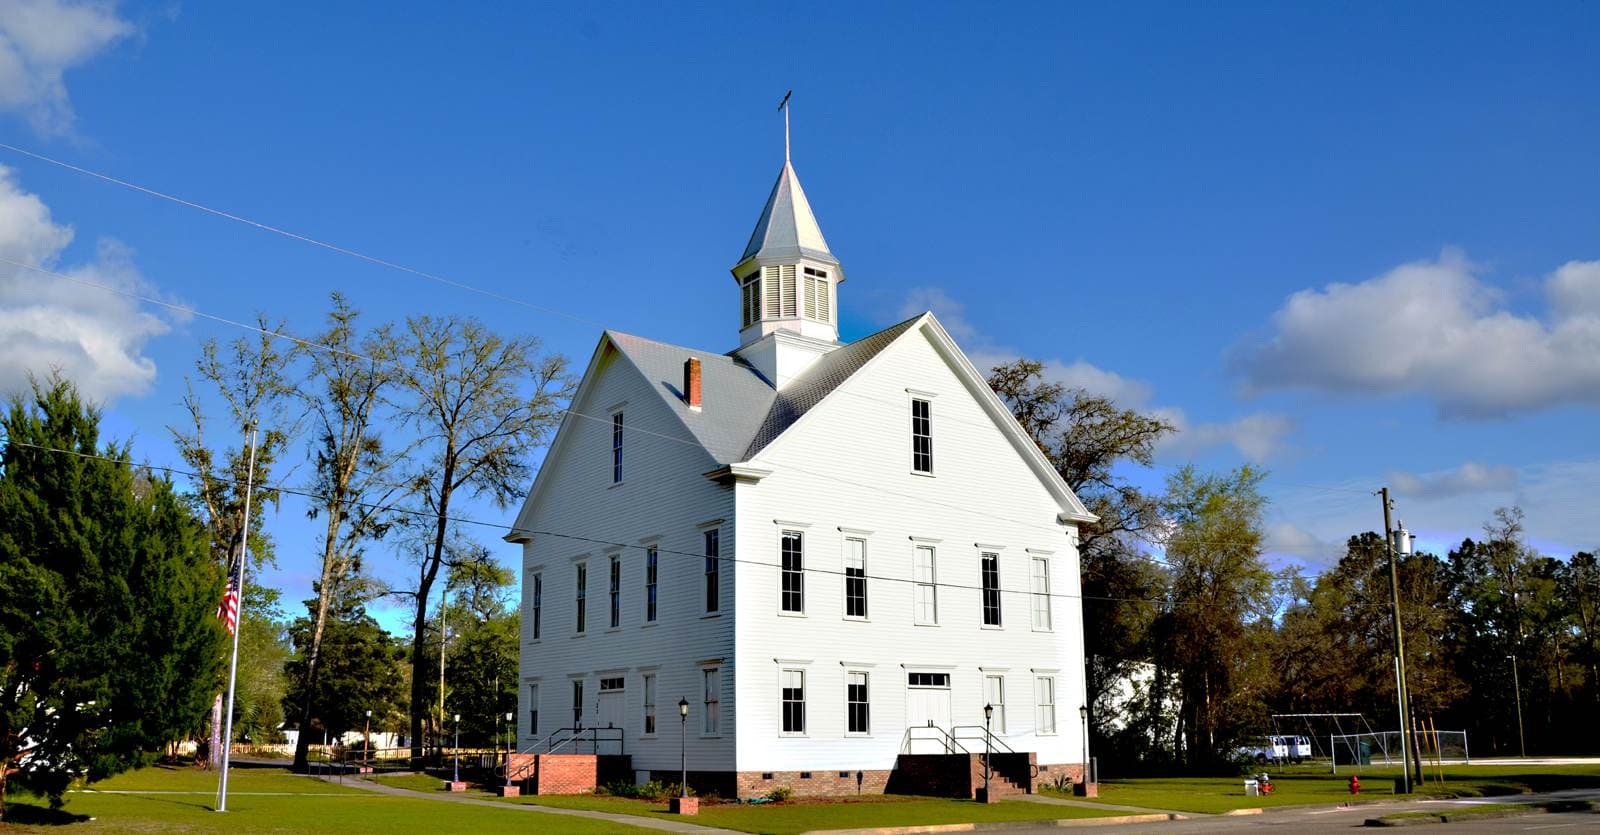 Image of a white church on grass